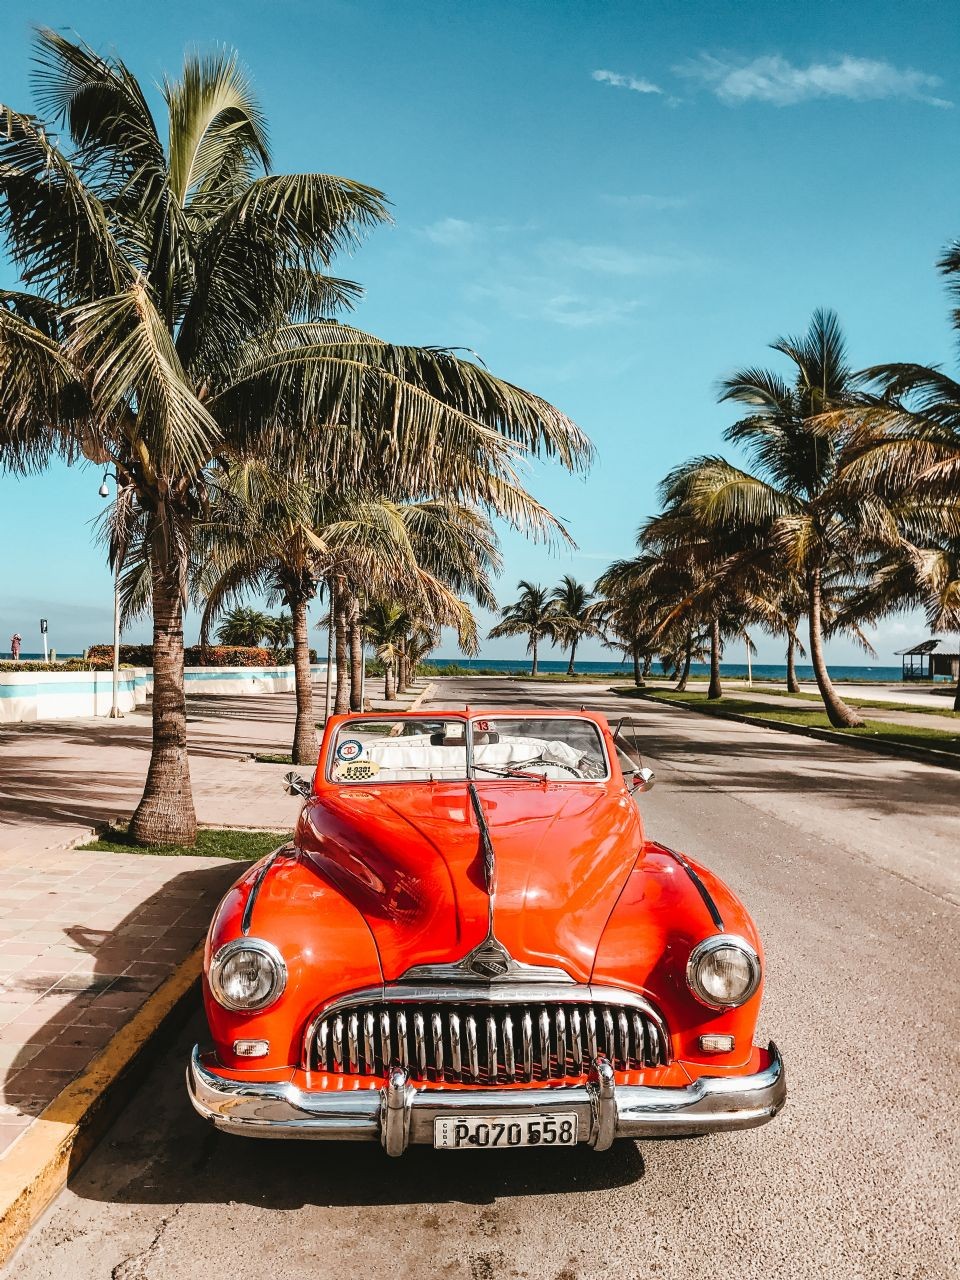 Location and history of Cuba